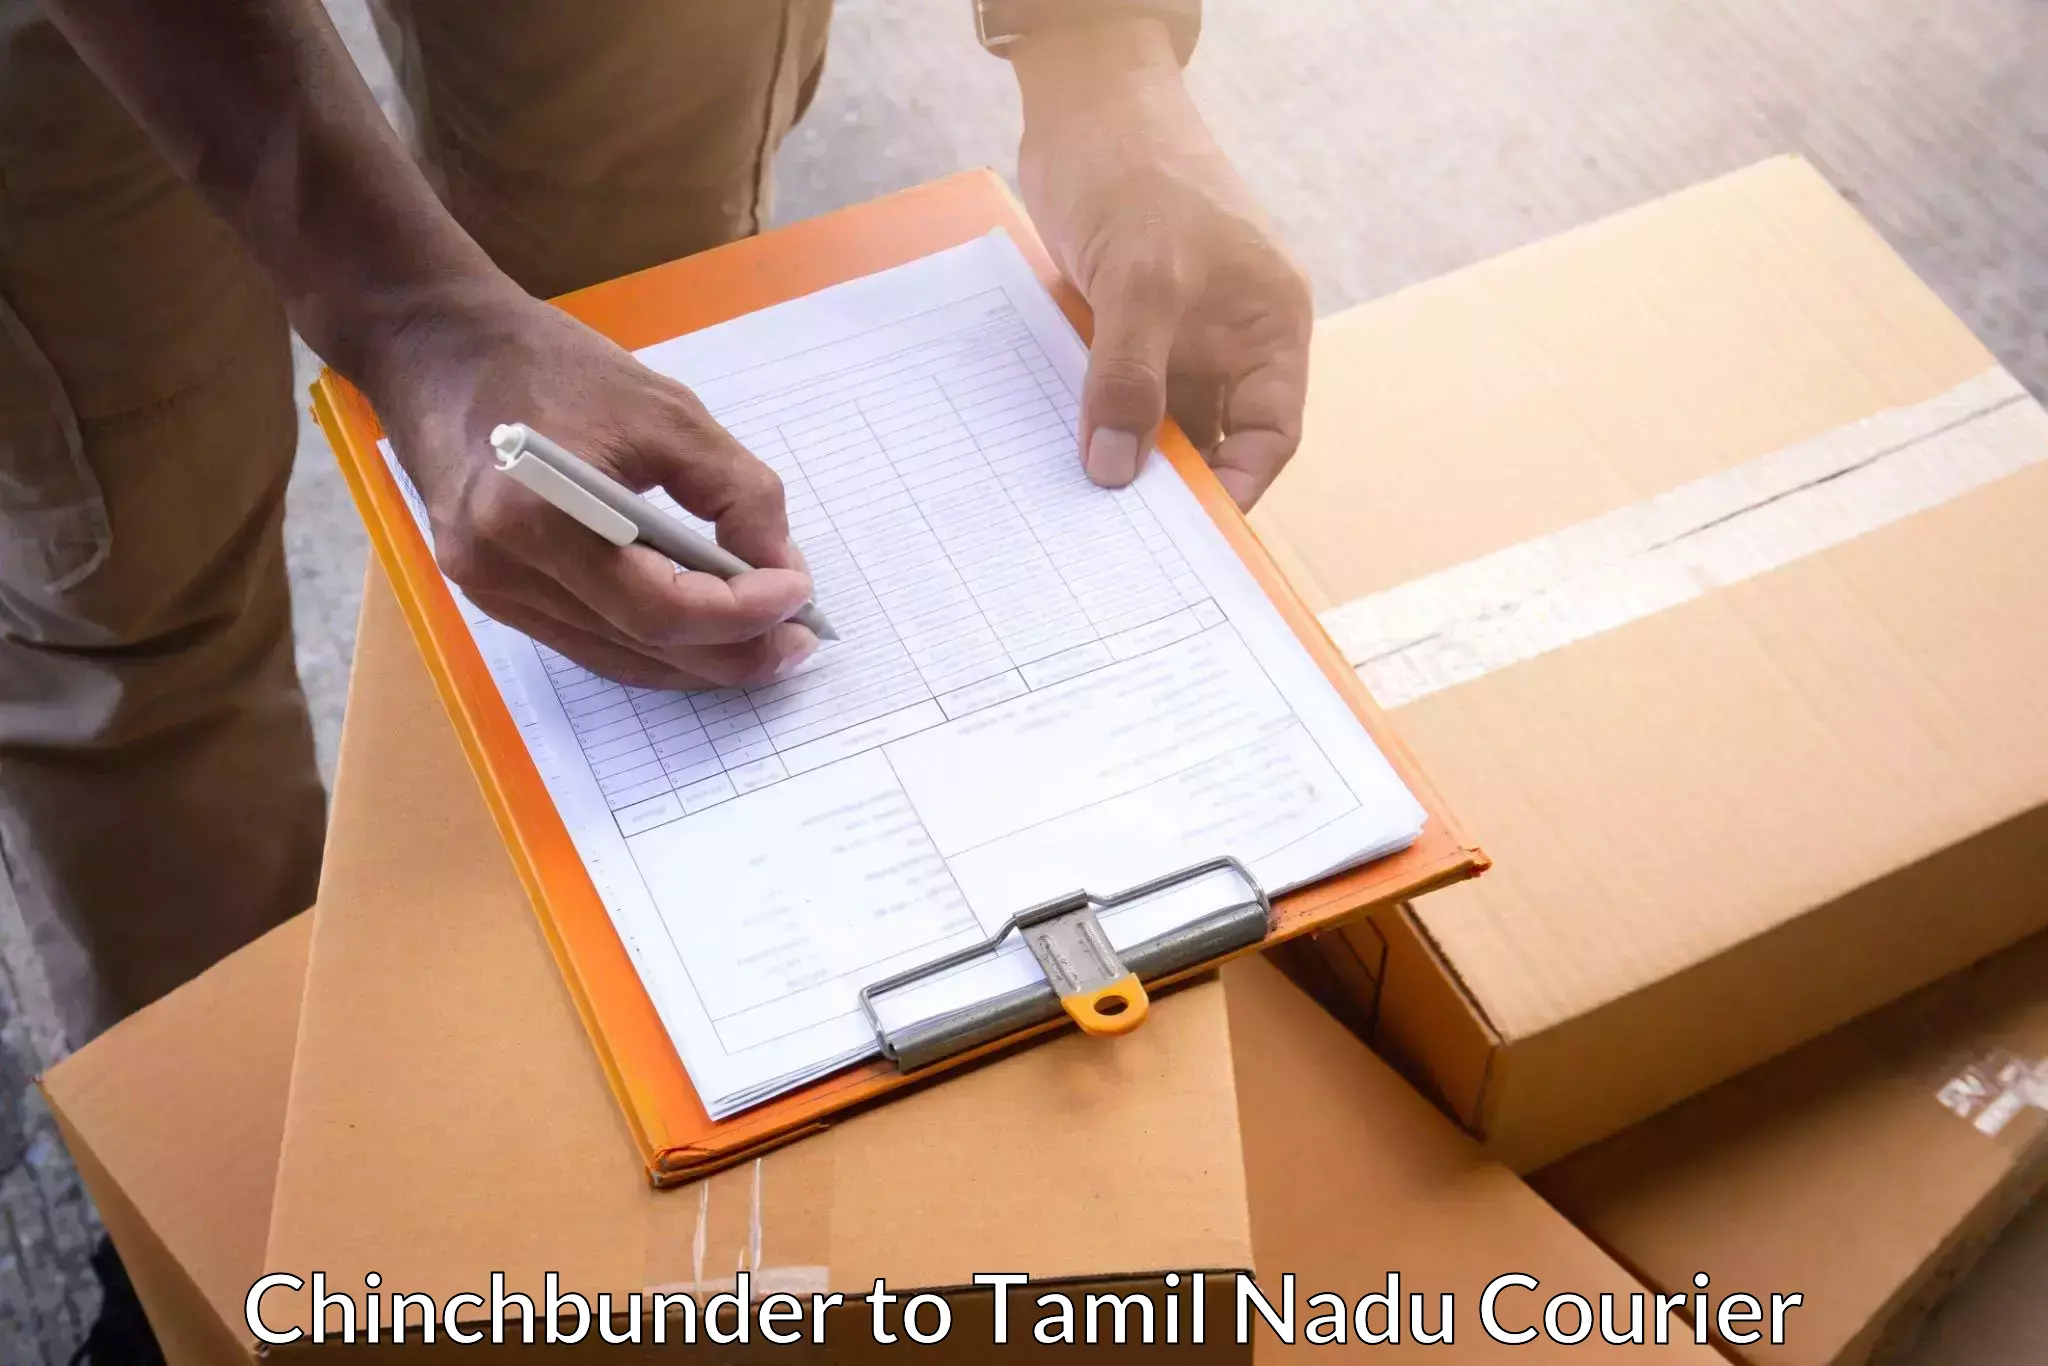 Sustainable courier practices in Chinchbunder to Thisayanvilai